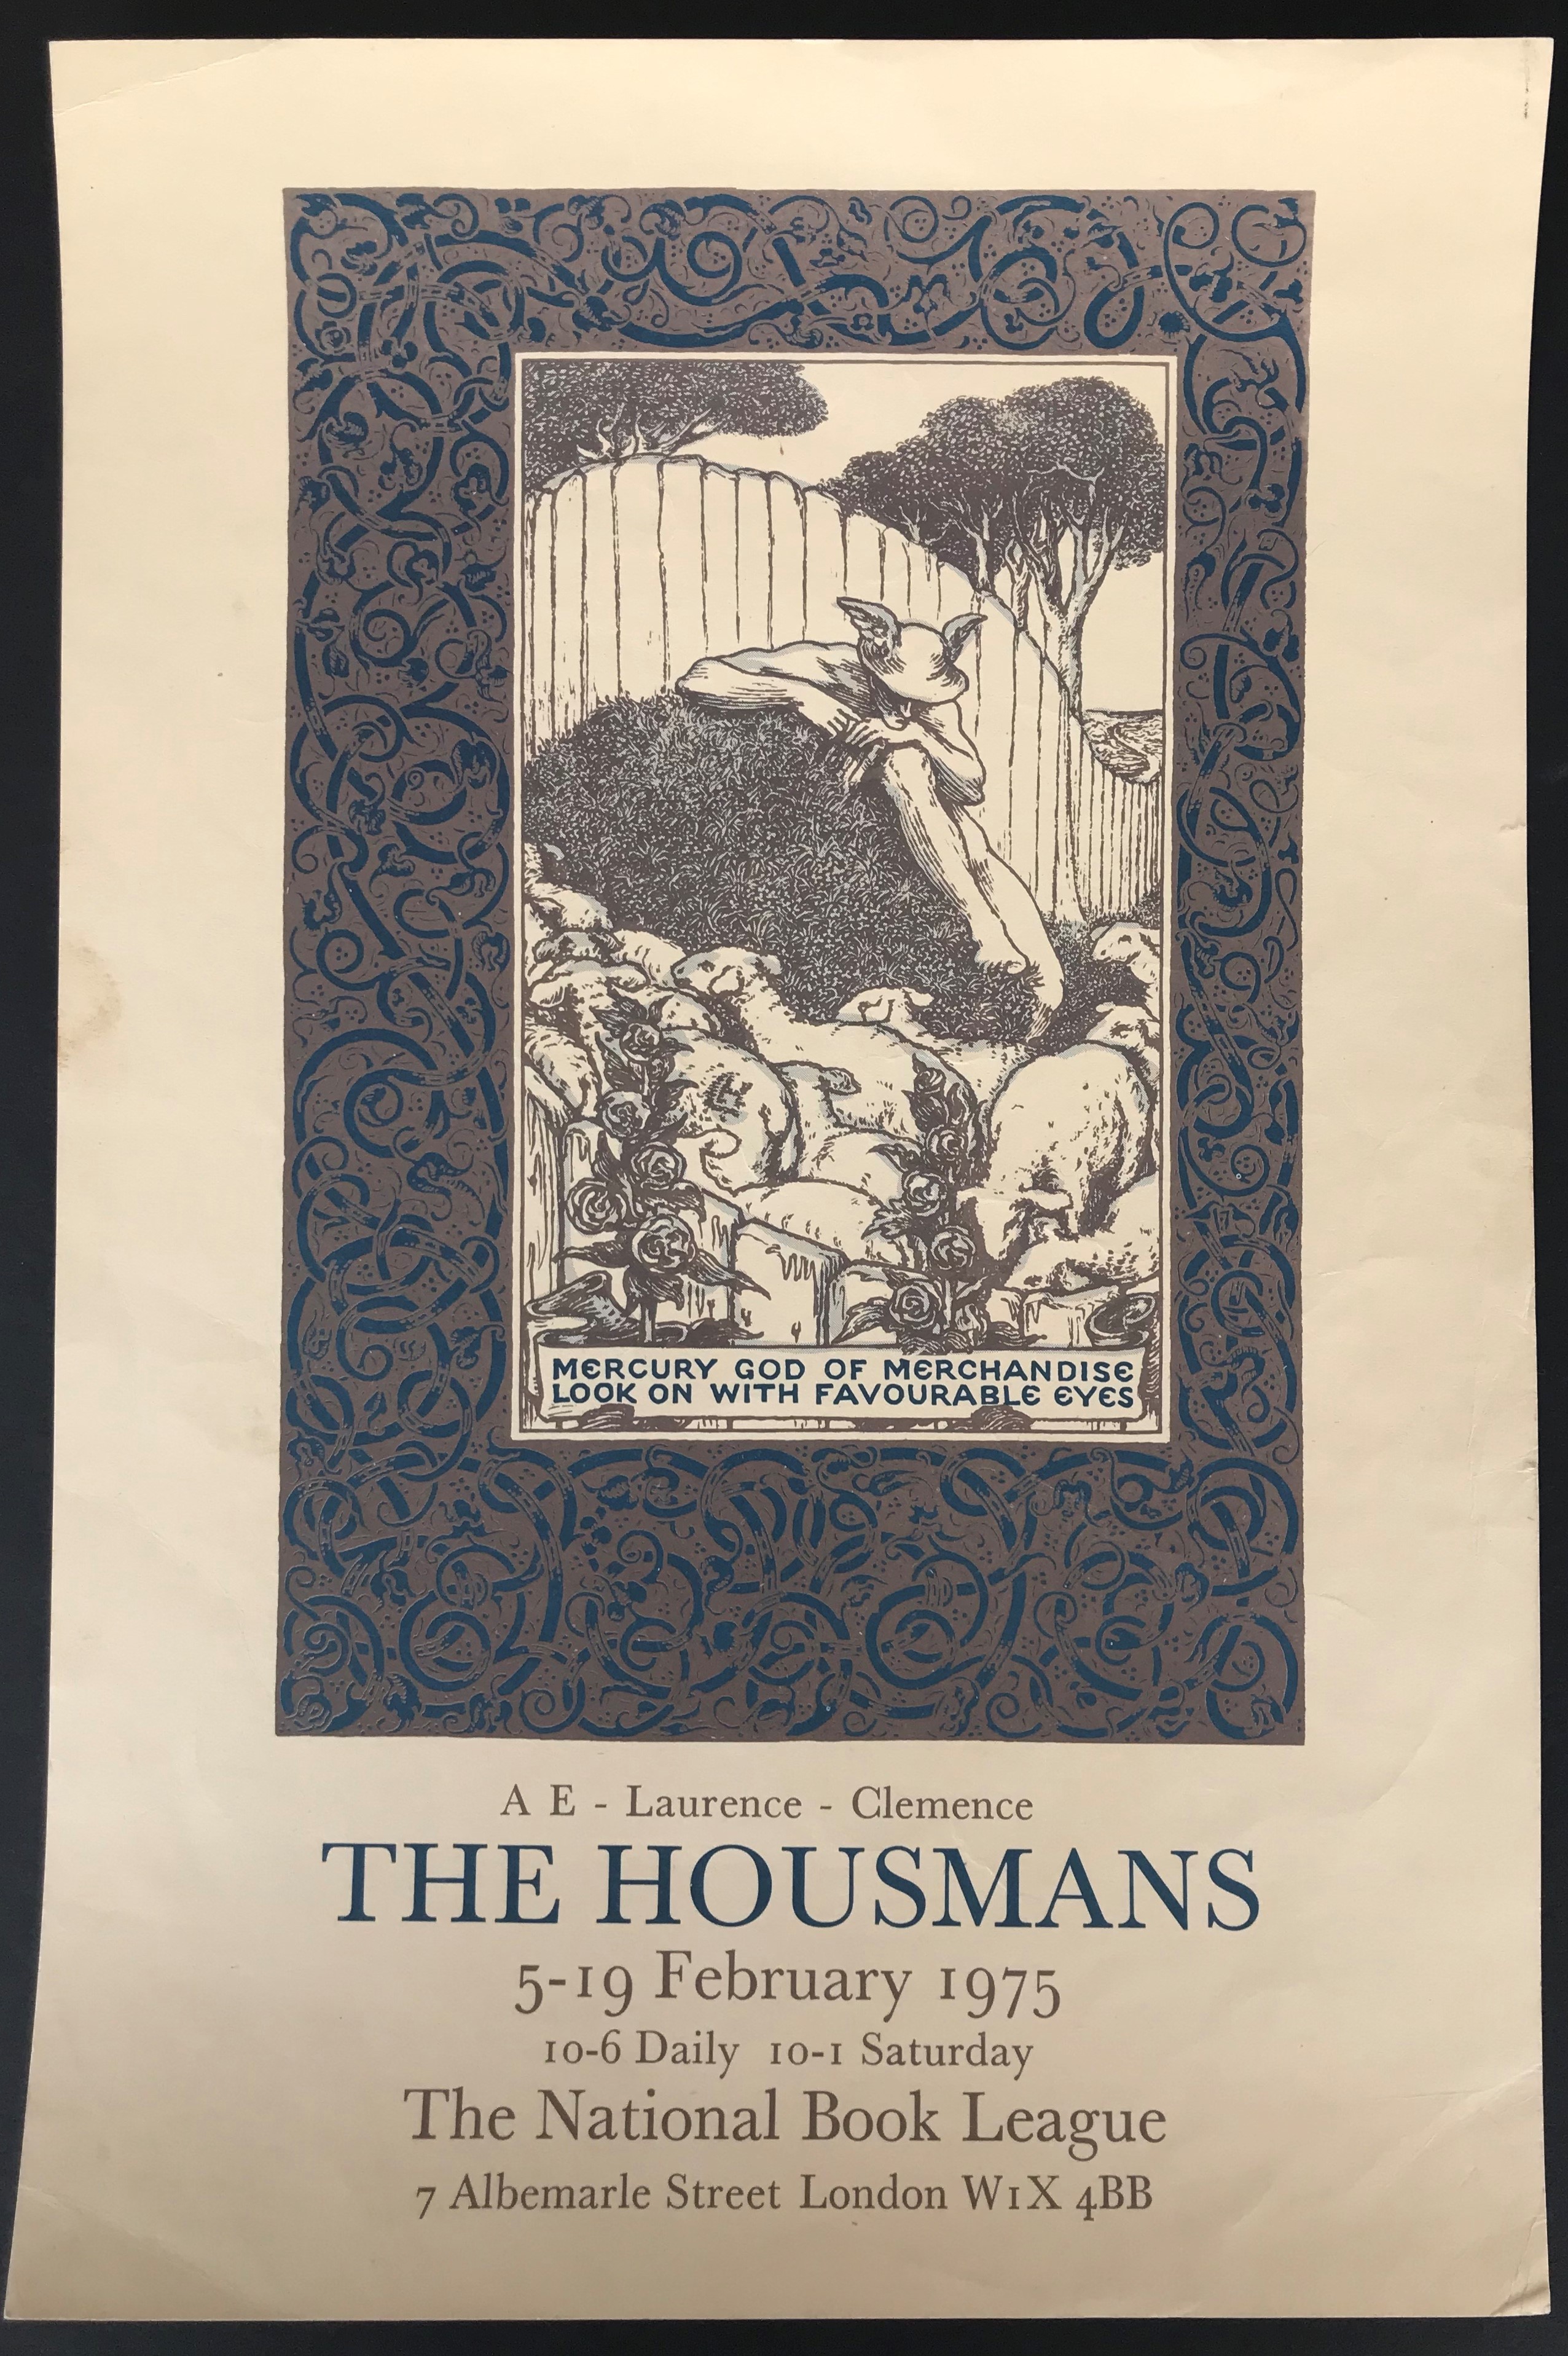 THE HOUSMANS THE NATIONAL BOOK LEAGUE SMALL POSTER 1975